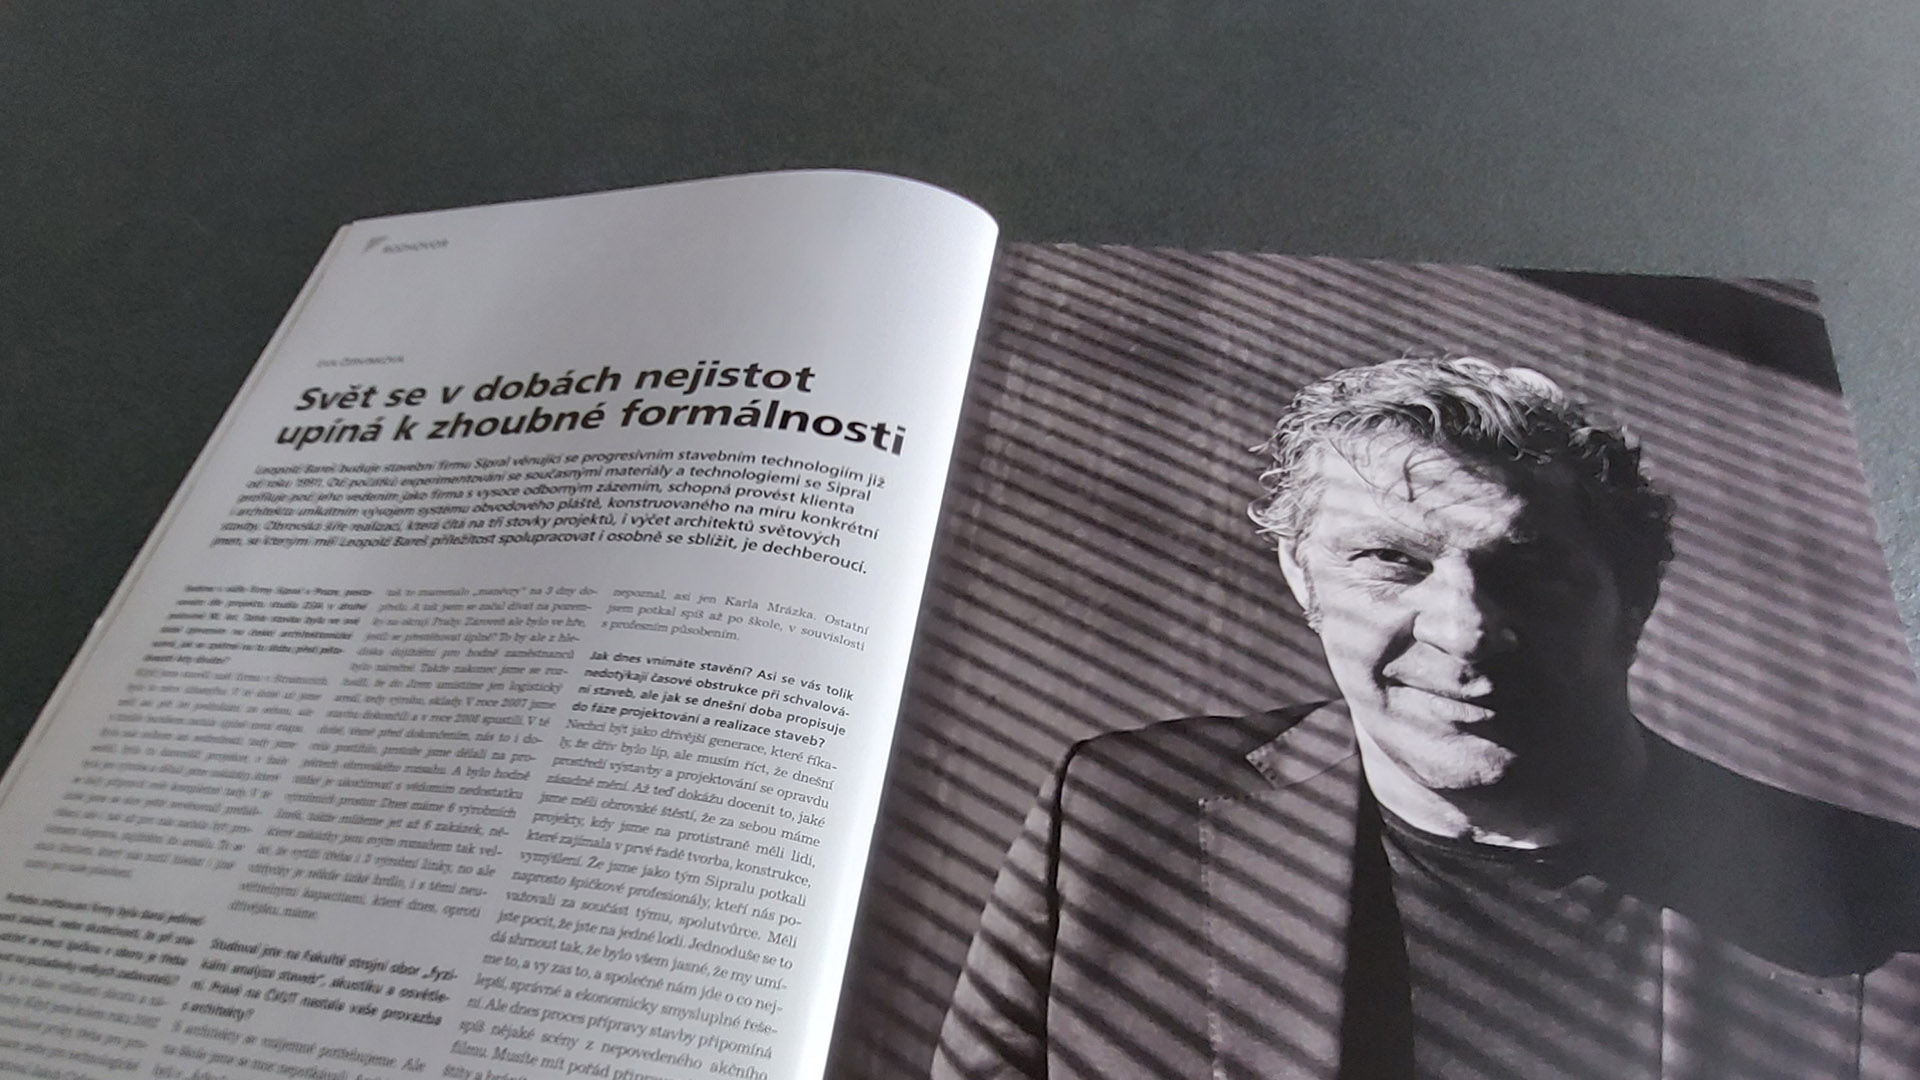 Leopold Bareš, founder and owner of Sipral, looks back at the company’s history in the Stavba Detail magazine